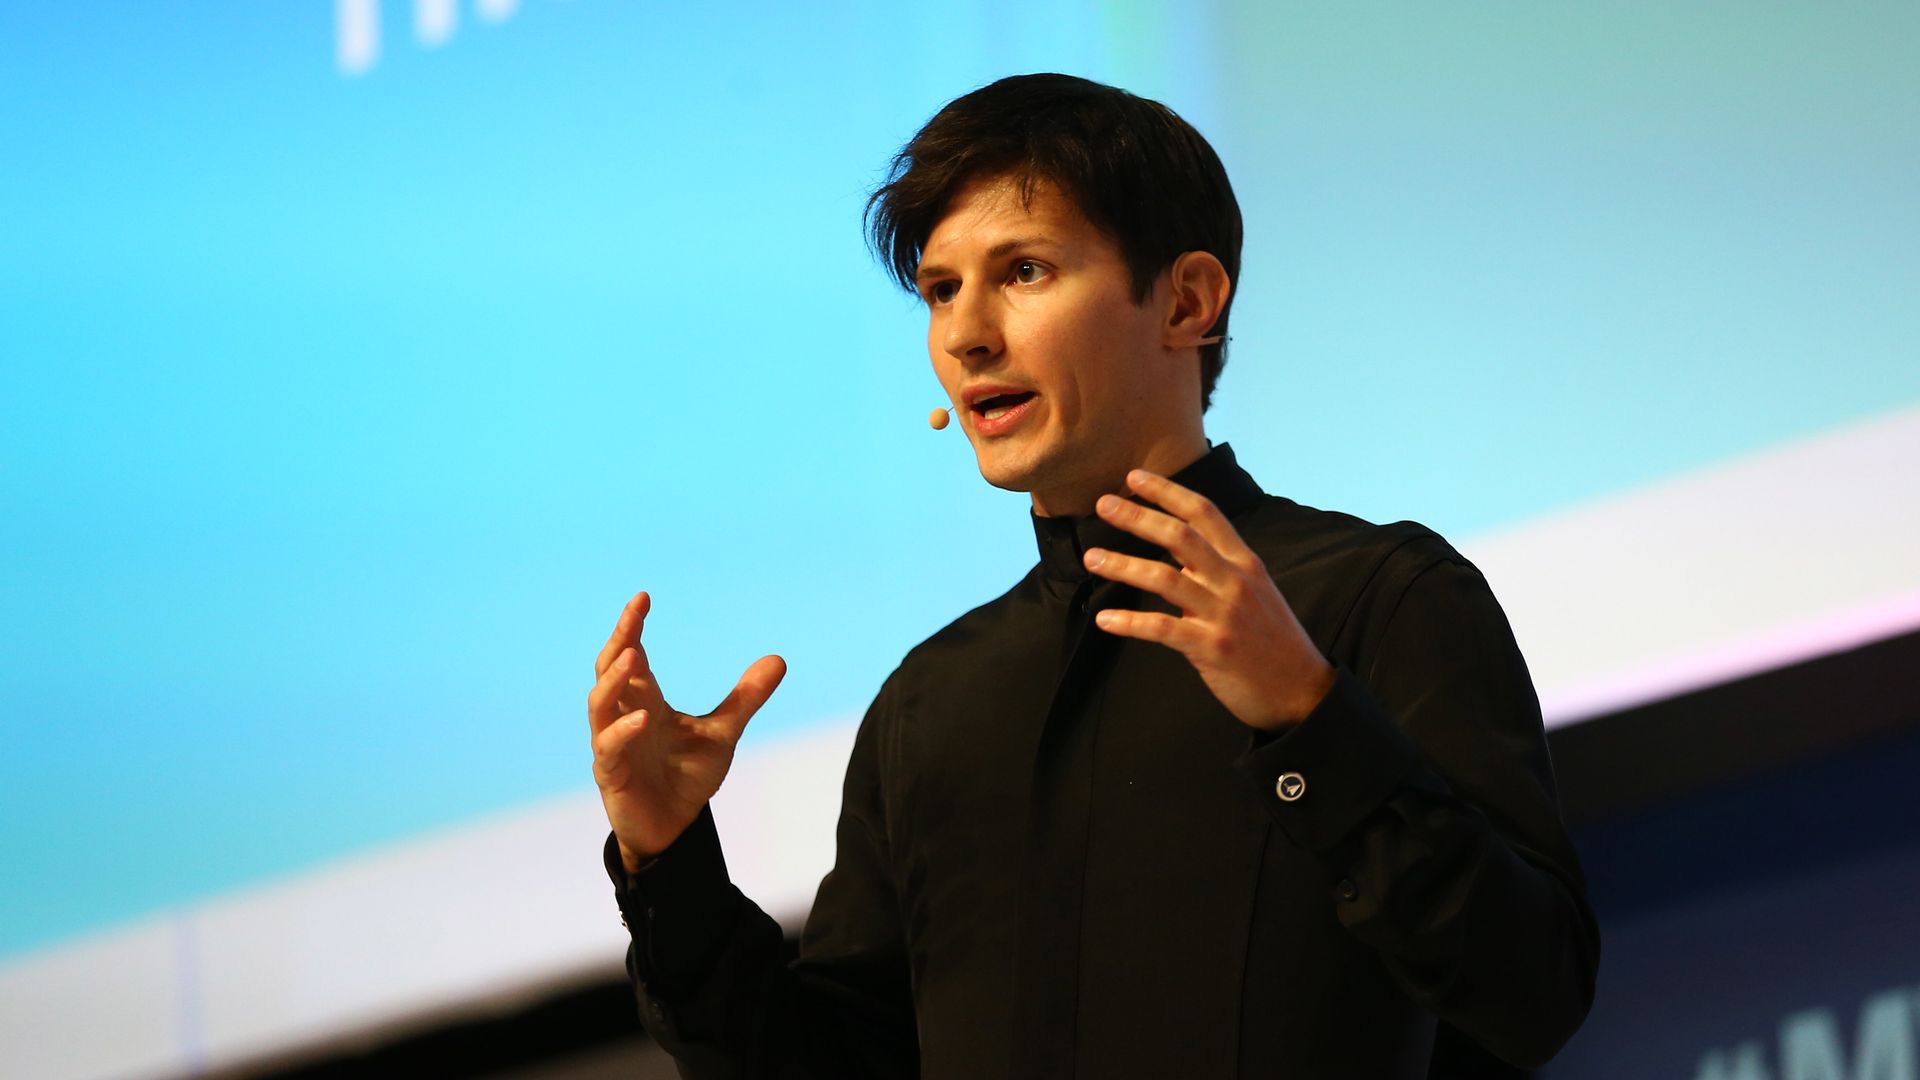 Telegram founder and CEO Pavel Durov delivers his keynote conference during day two of the Mobile World Congress at the Fira Gran Via complex in Barcelona, Spain on February 23, 2016.